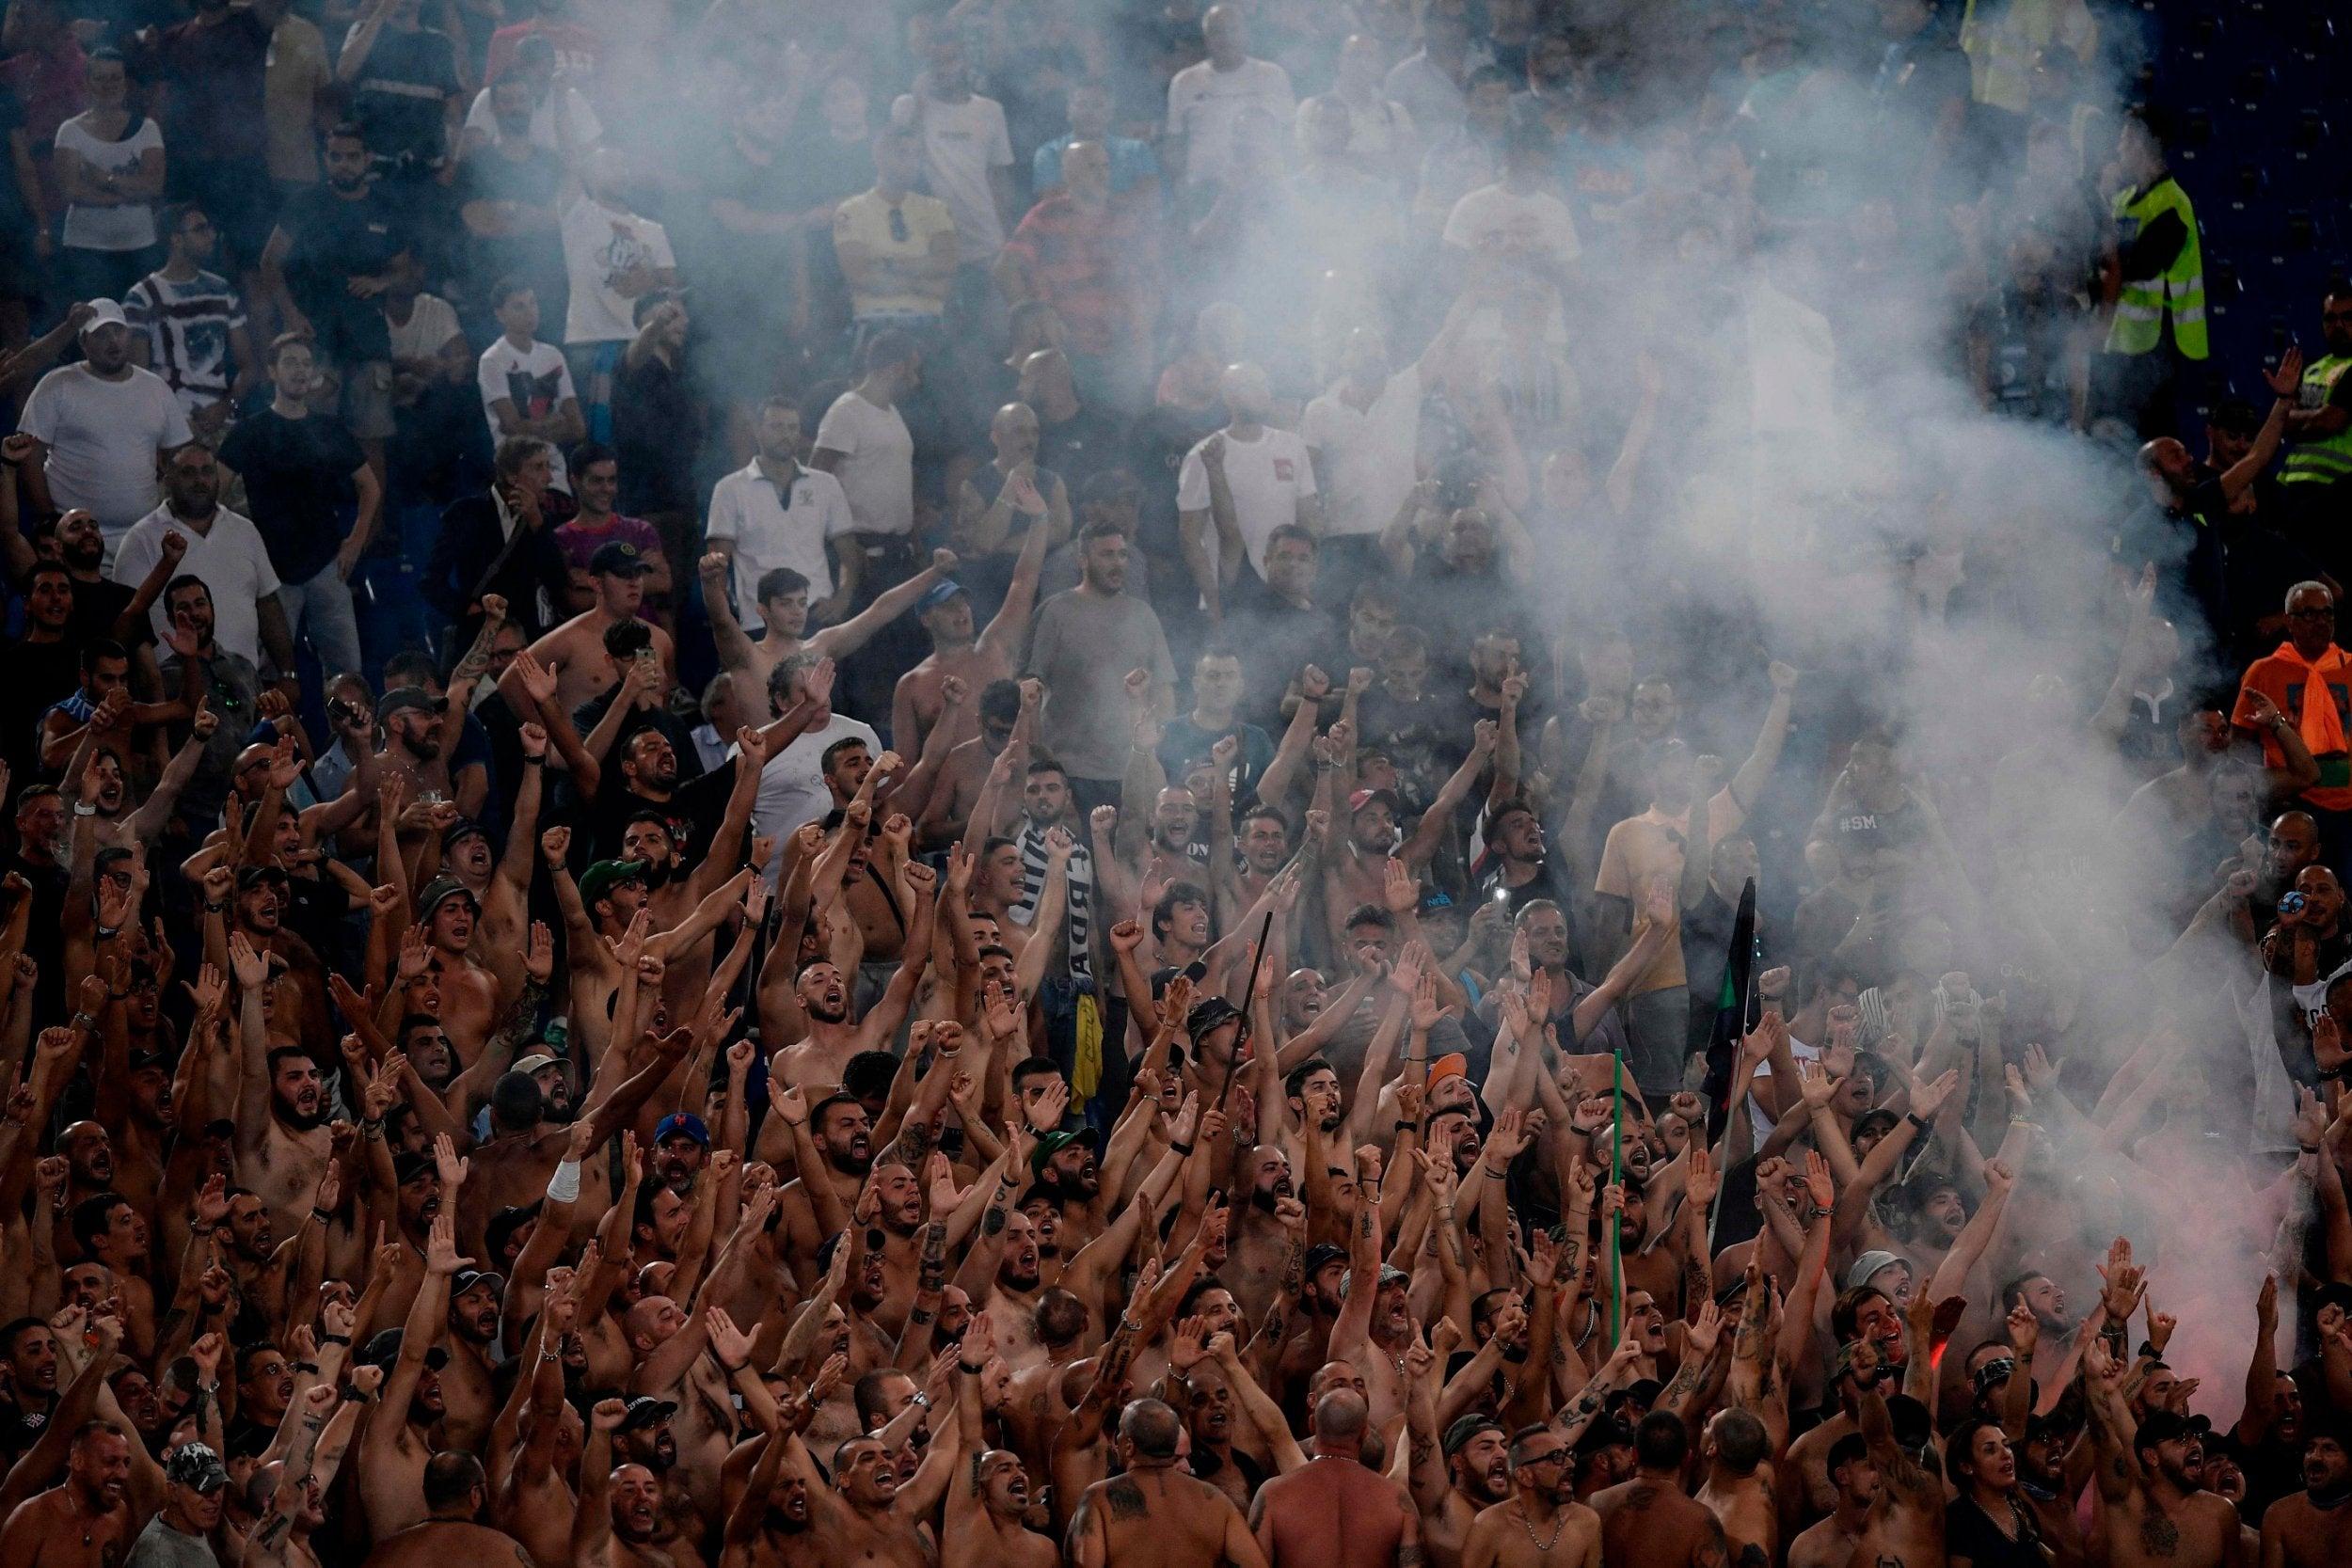 Lazio fans known as 'Ultras' have told women to stay away from the front 10 rows at the Stadio Olimpico